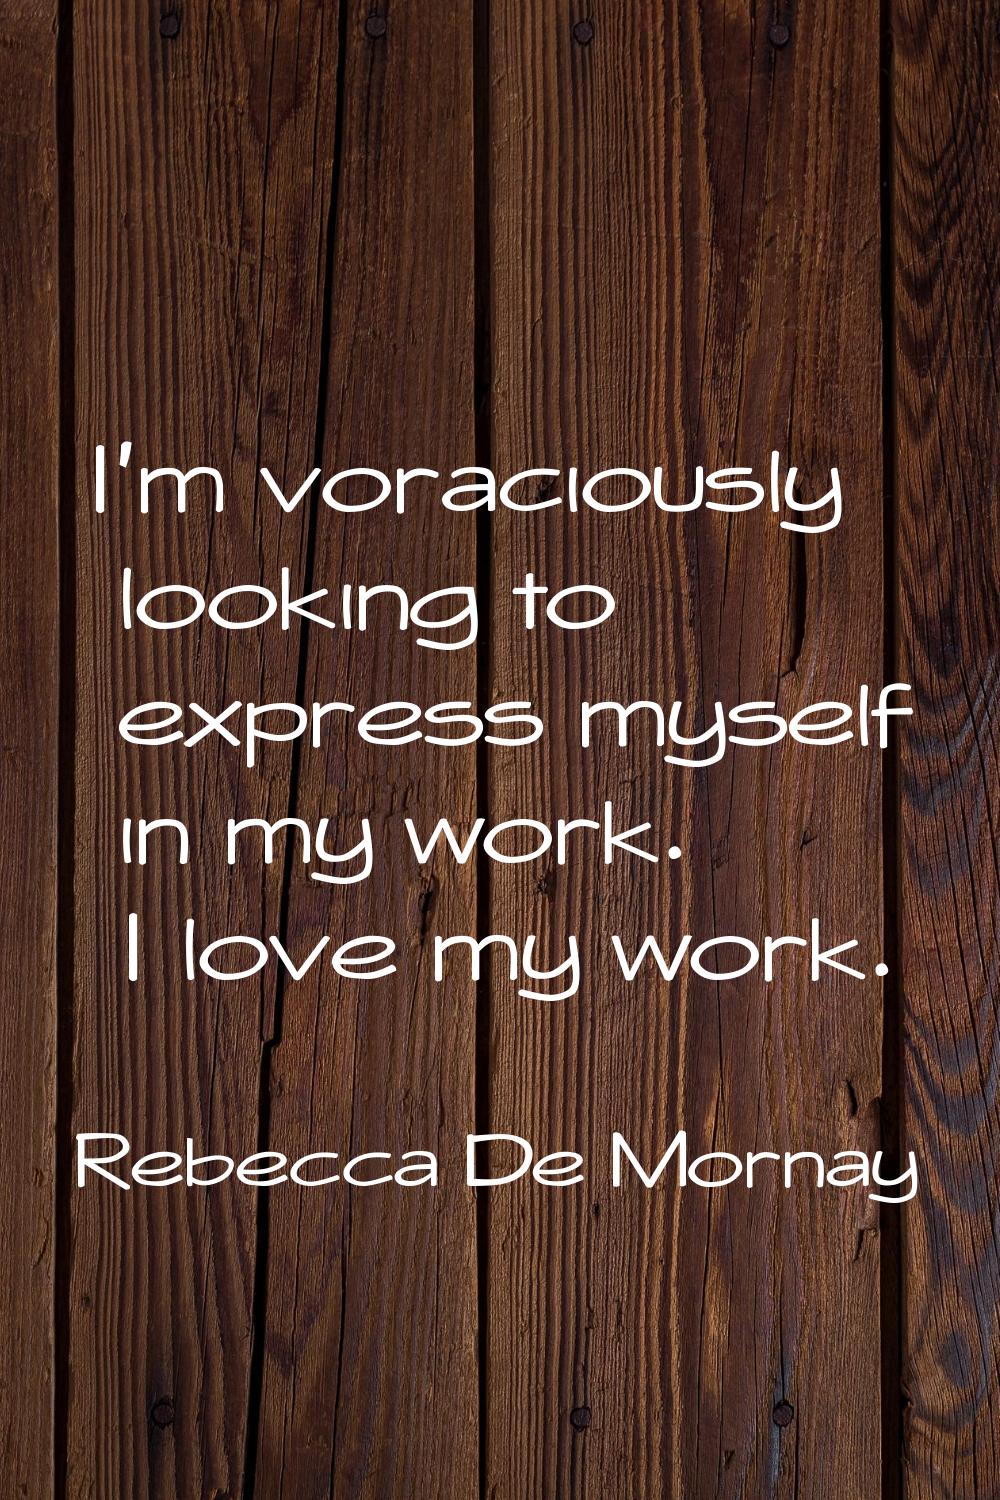 I'm voraciously looking to express myself in my work. I love my work.